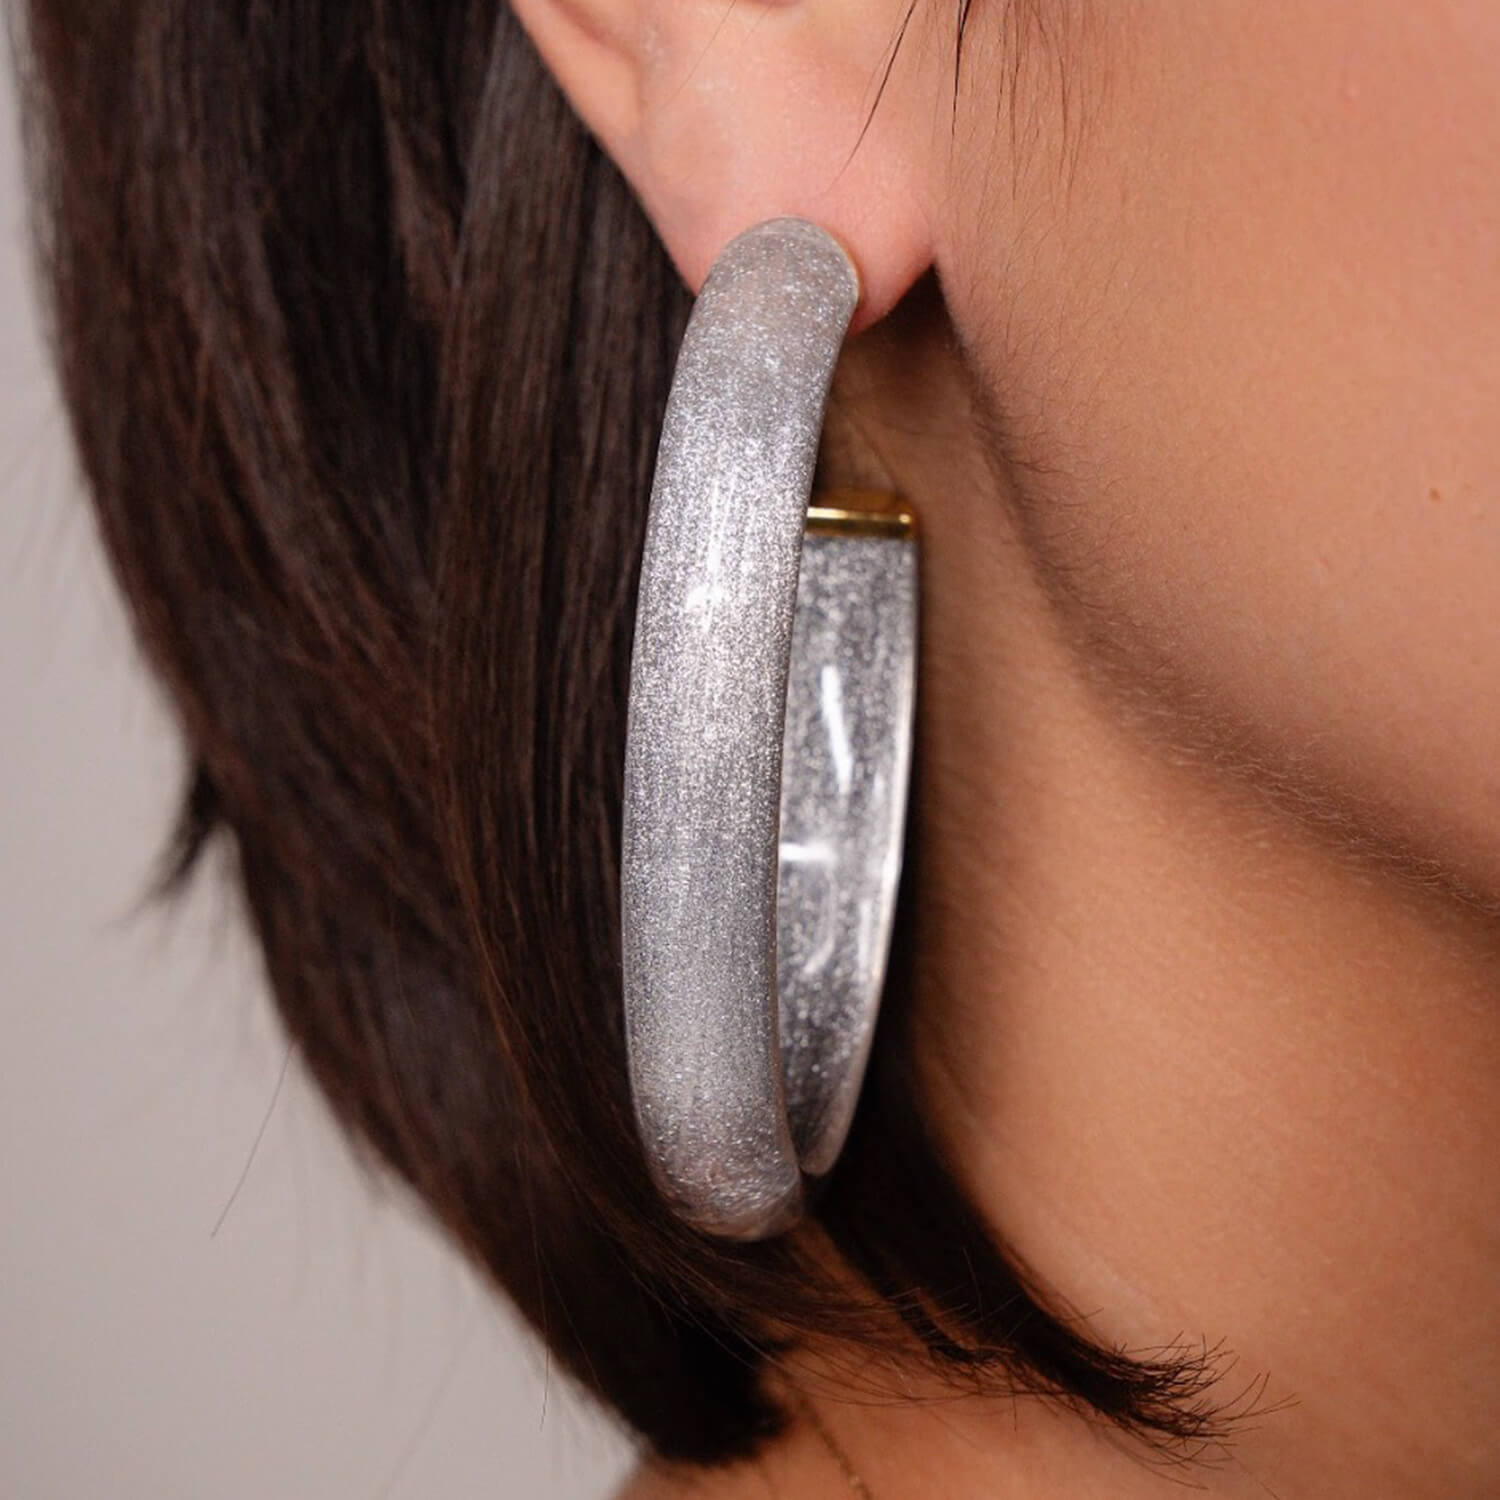 Clear Oval Hoops